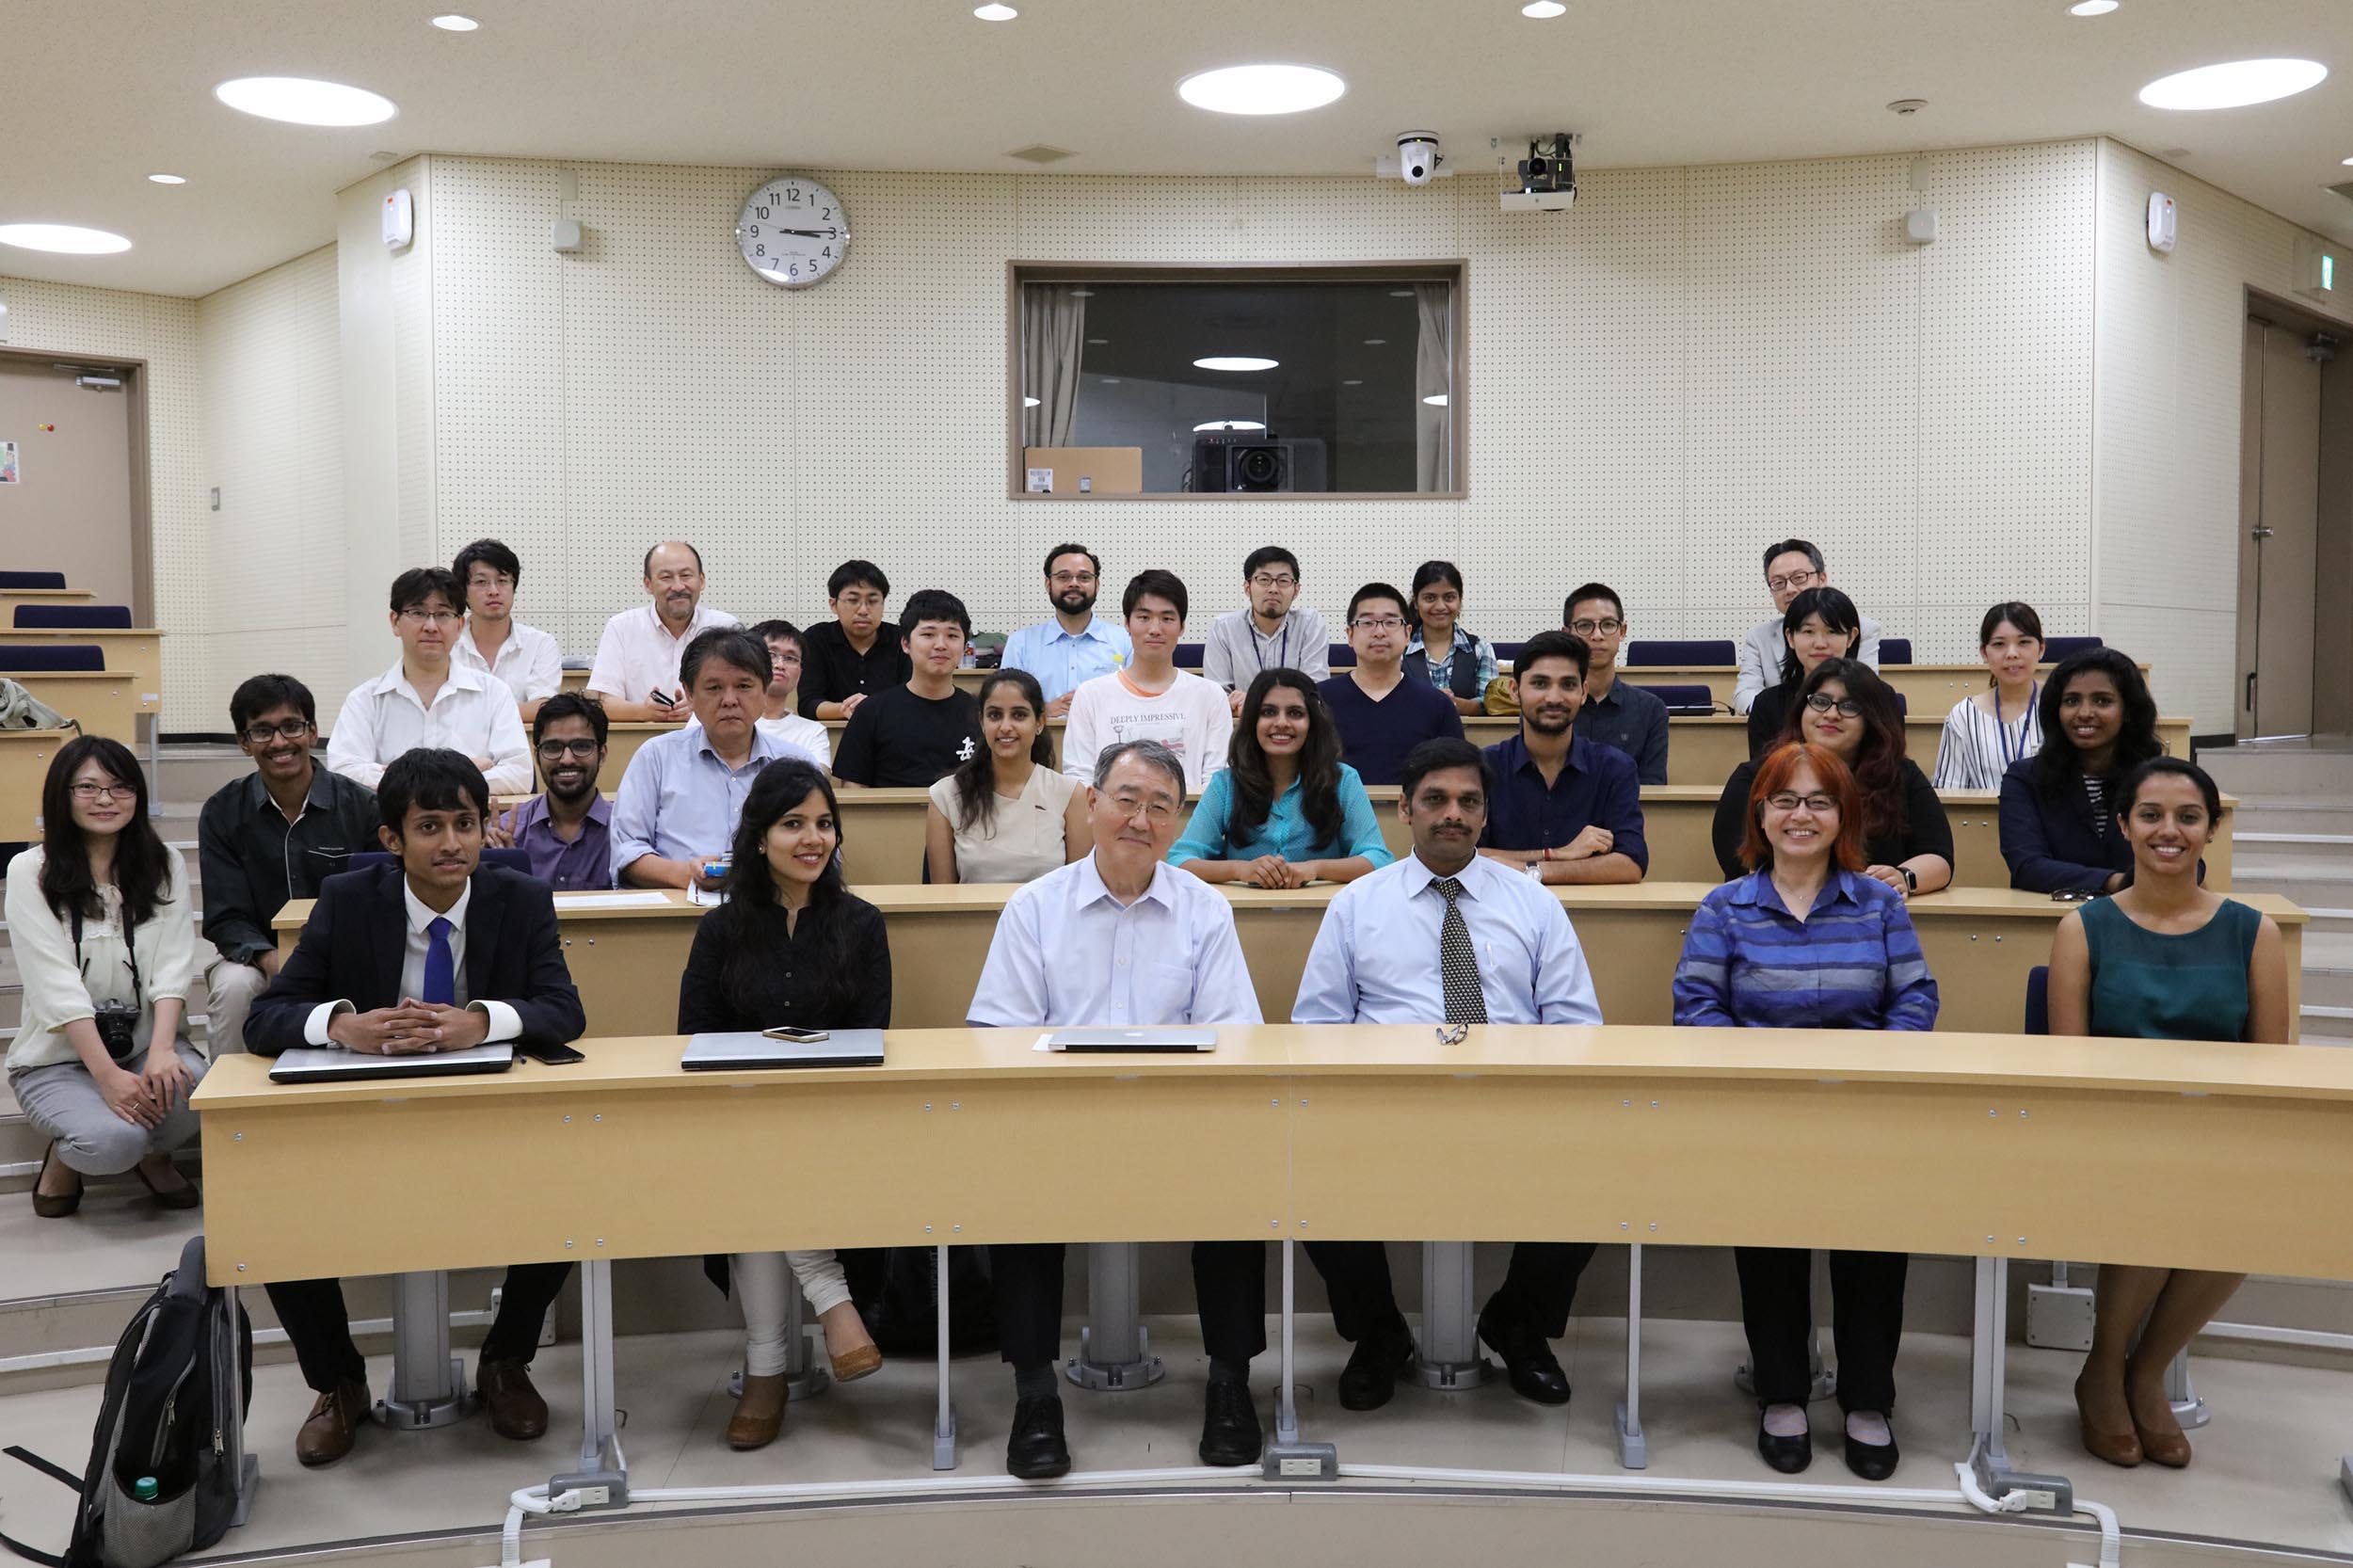 Trustee Matsuzawa (at the center in the front row) also participated in the meeting